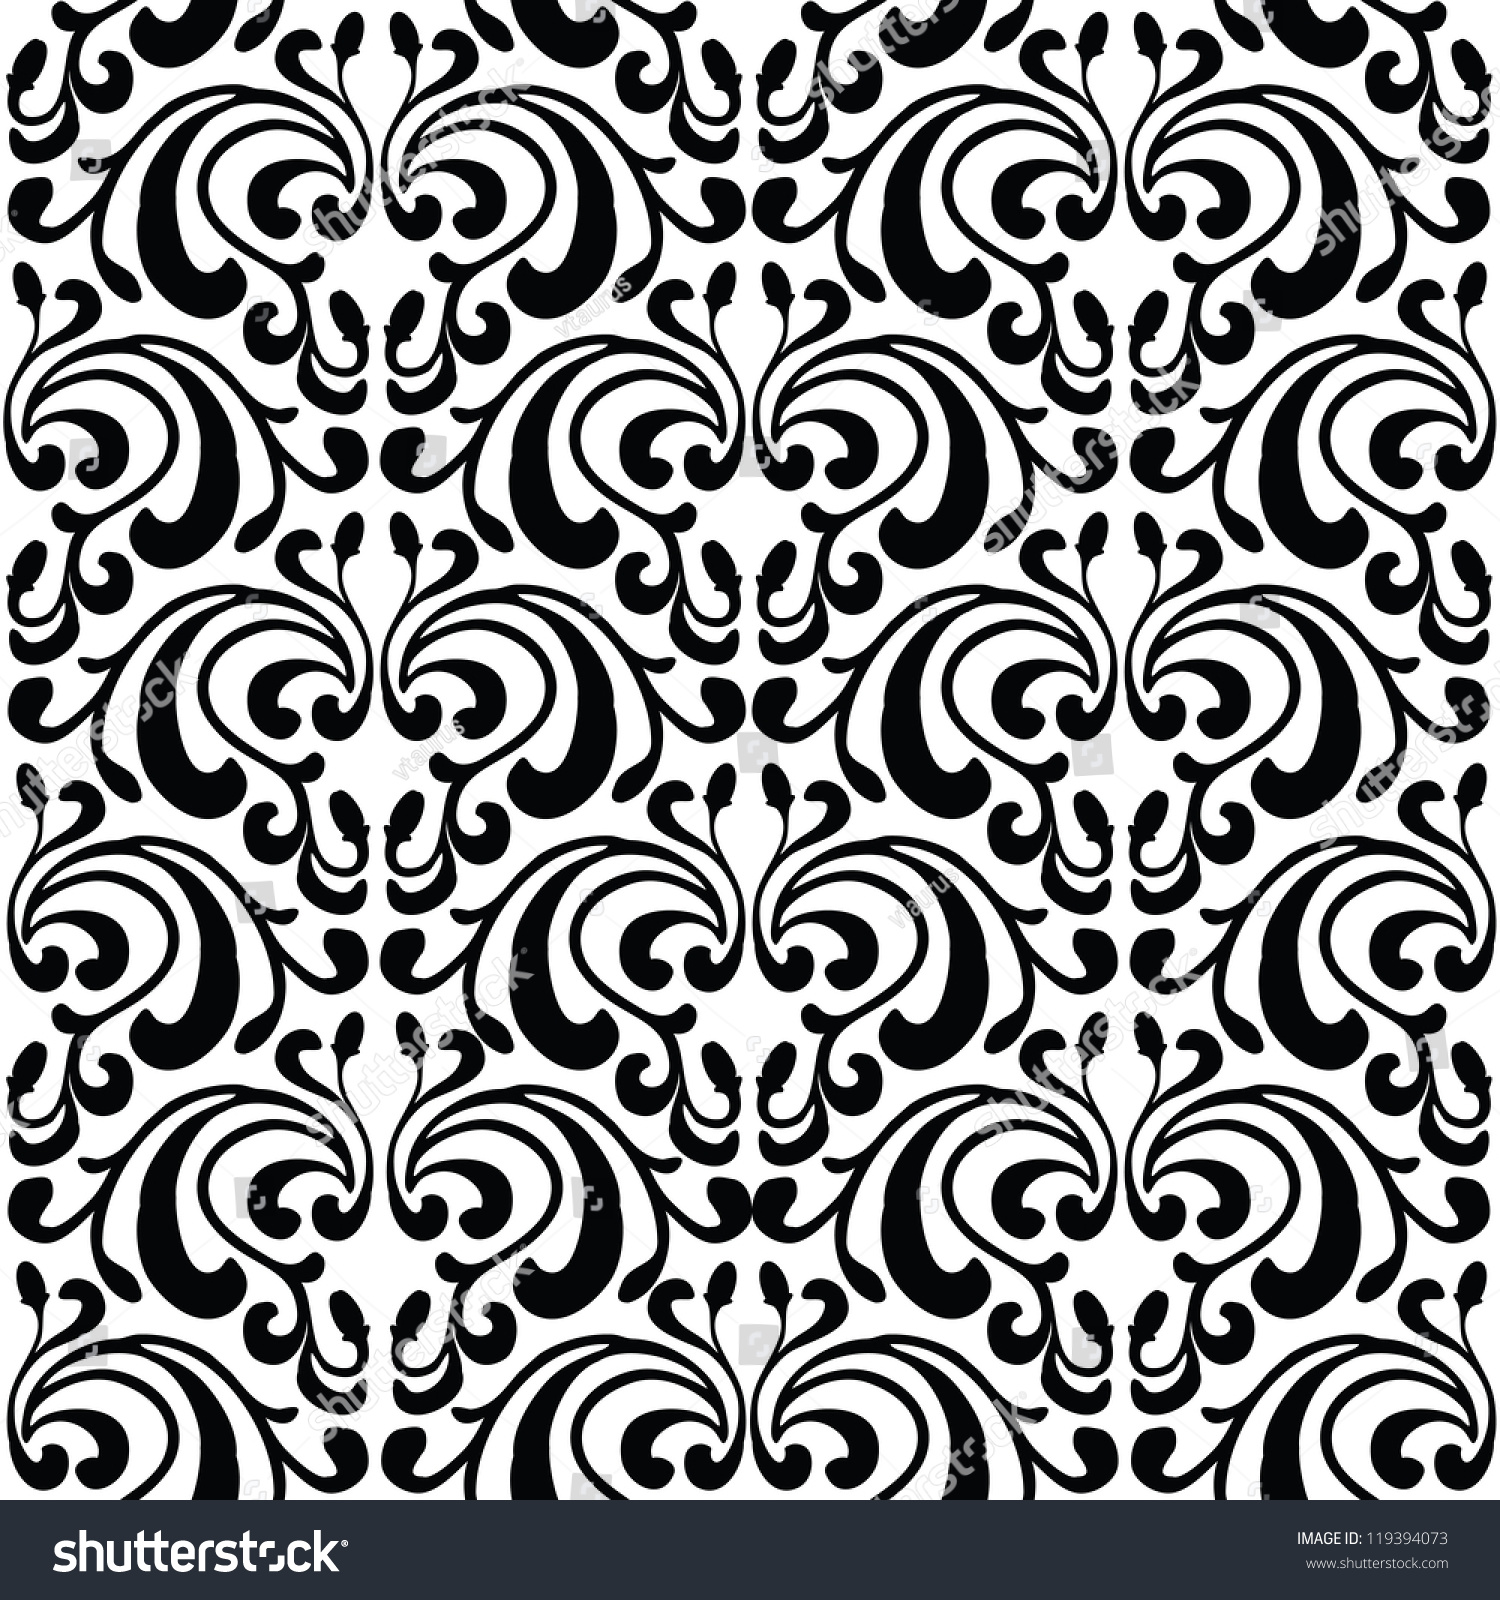 Seamless Abstract Pattern Of Flowers In Black And White. Vector ...